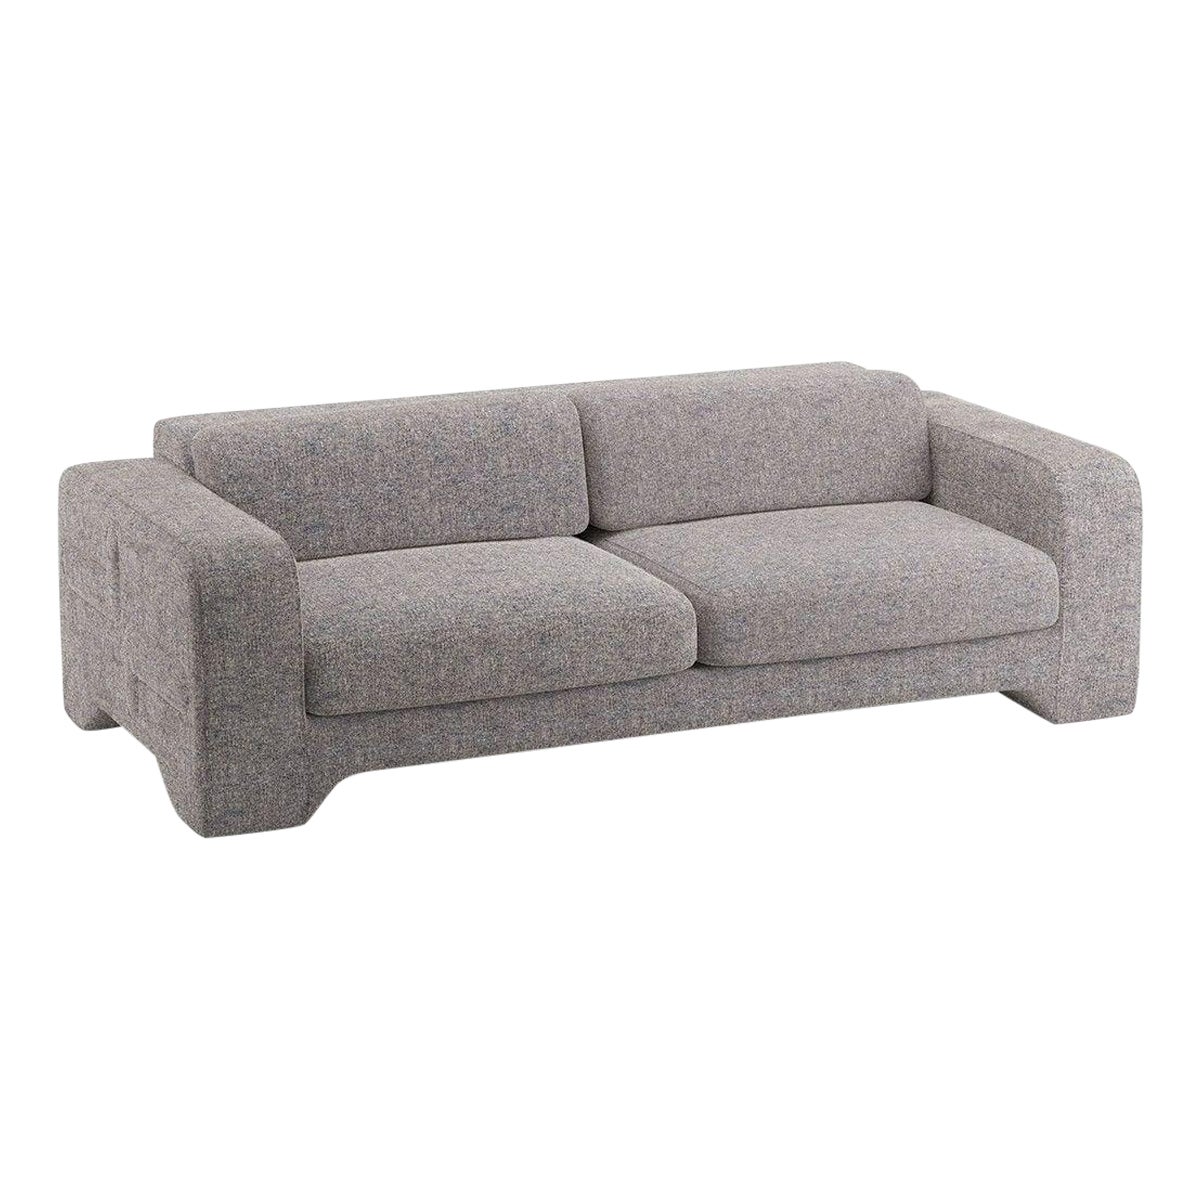 Popus Editions Giovanna 4 Seater Sofa in Marine London Linen Fabric For Sale